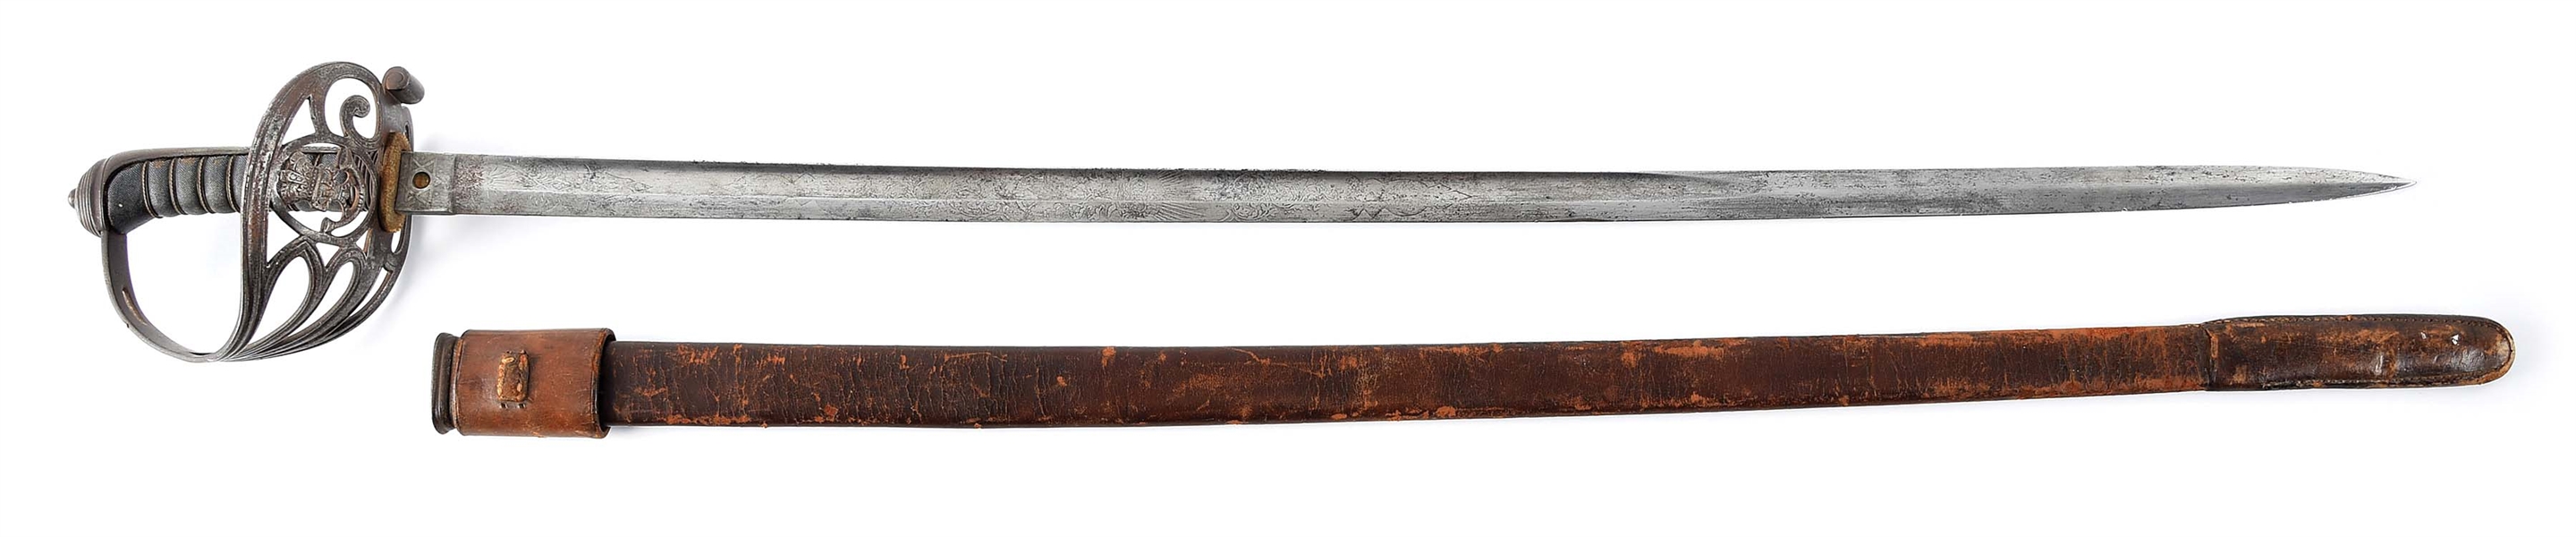 ENGLISH OFFICERS SWORD